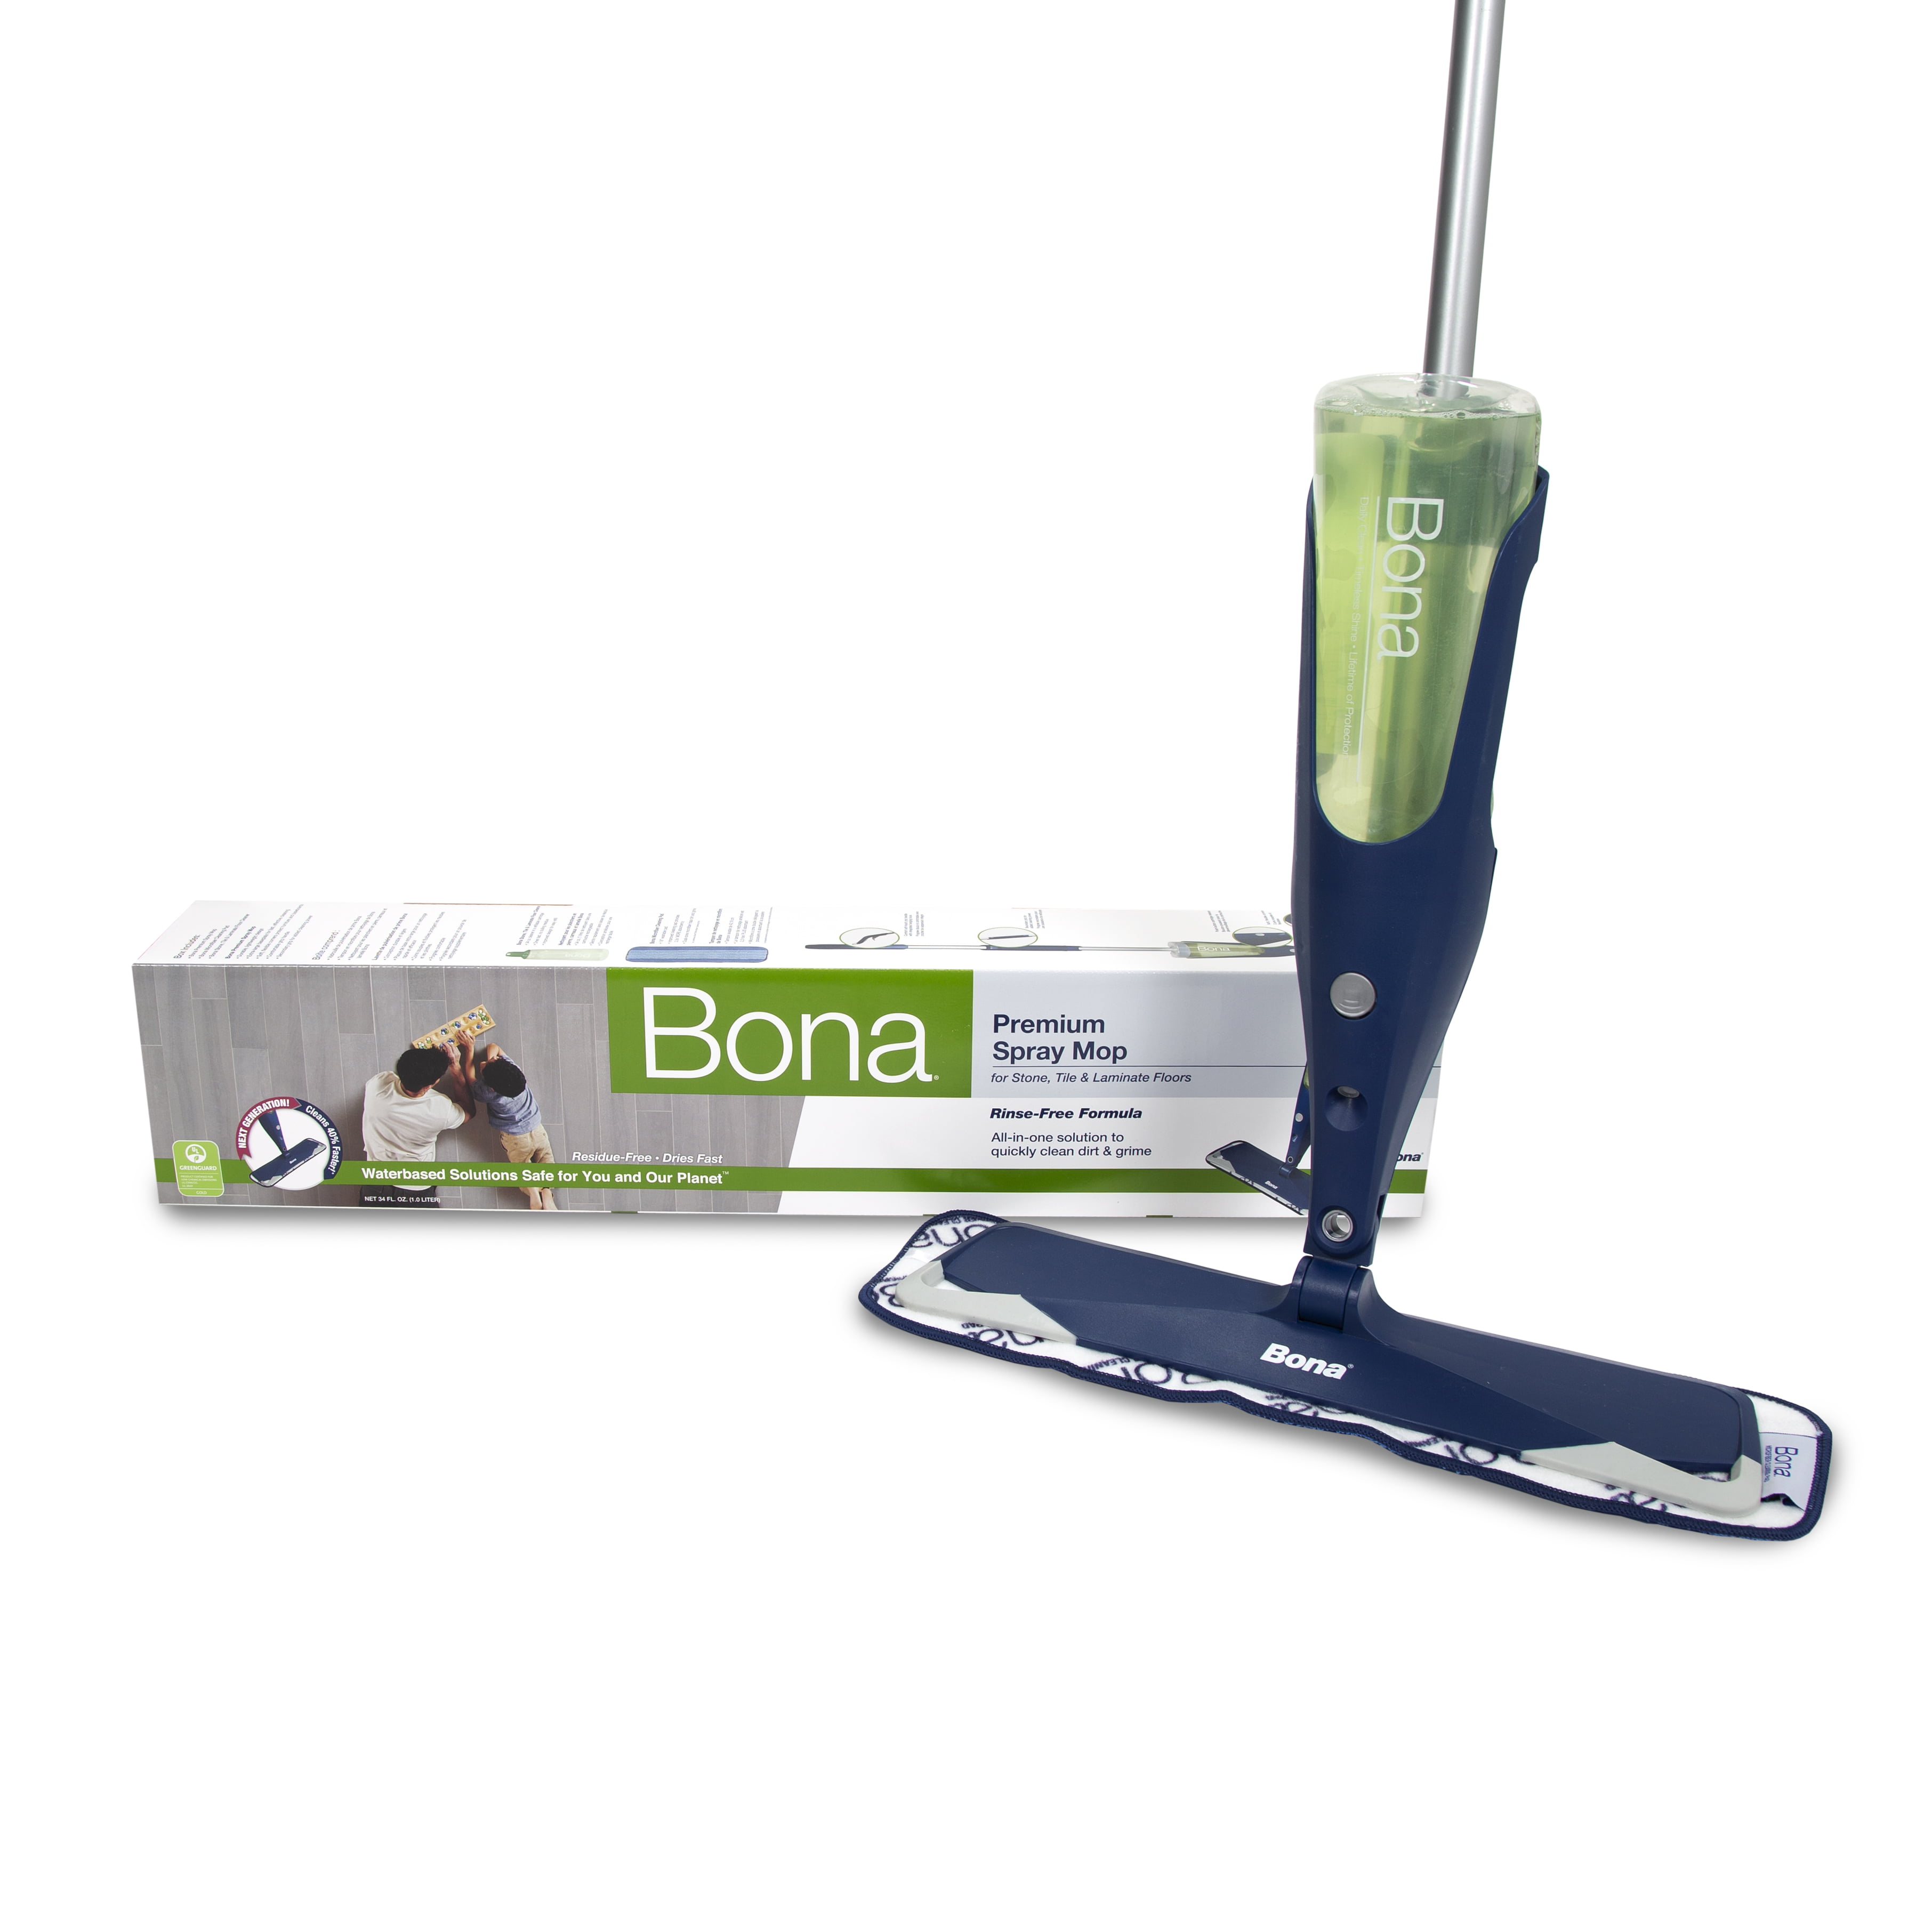 Bona Spray Mop For Hardwood Floors With, What Kind Of Mop For Hardwood Floors